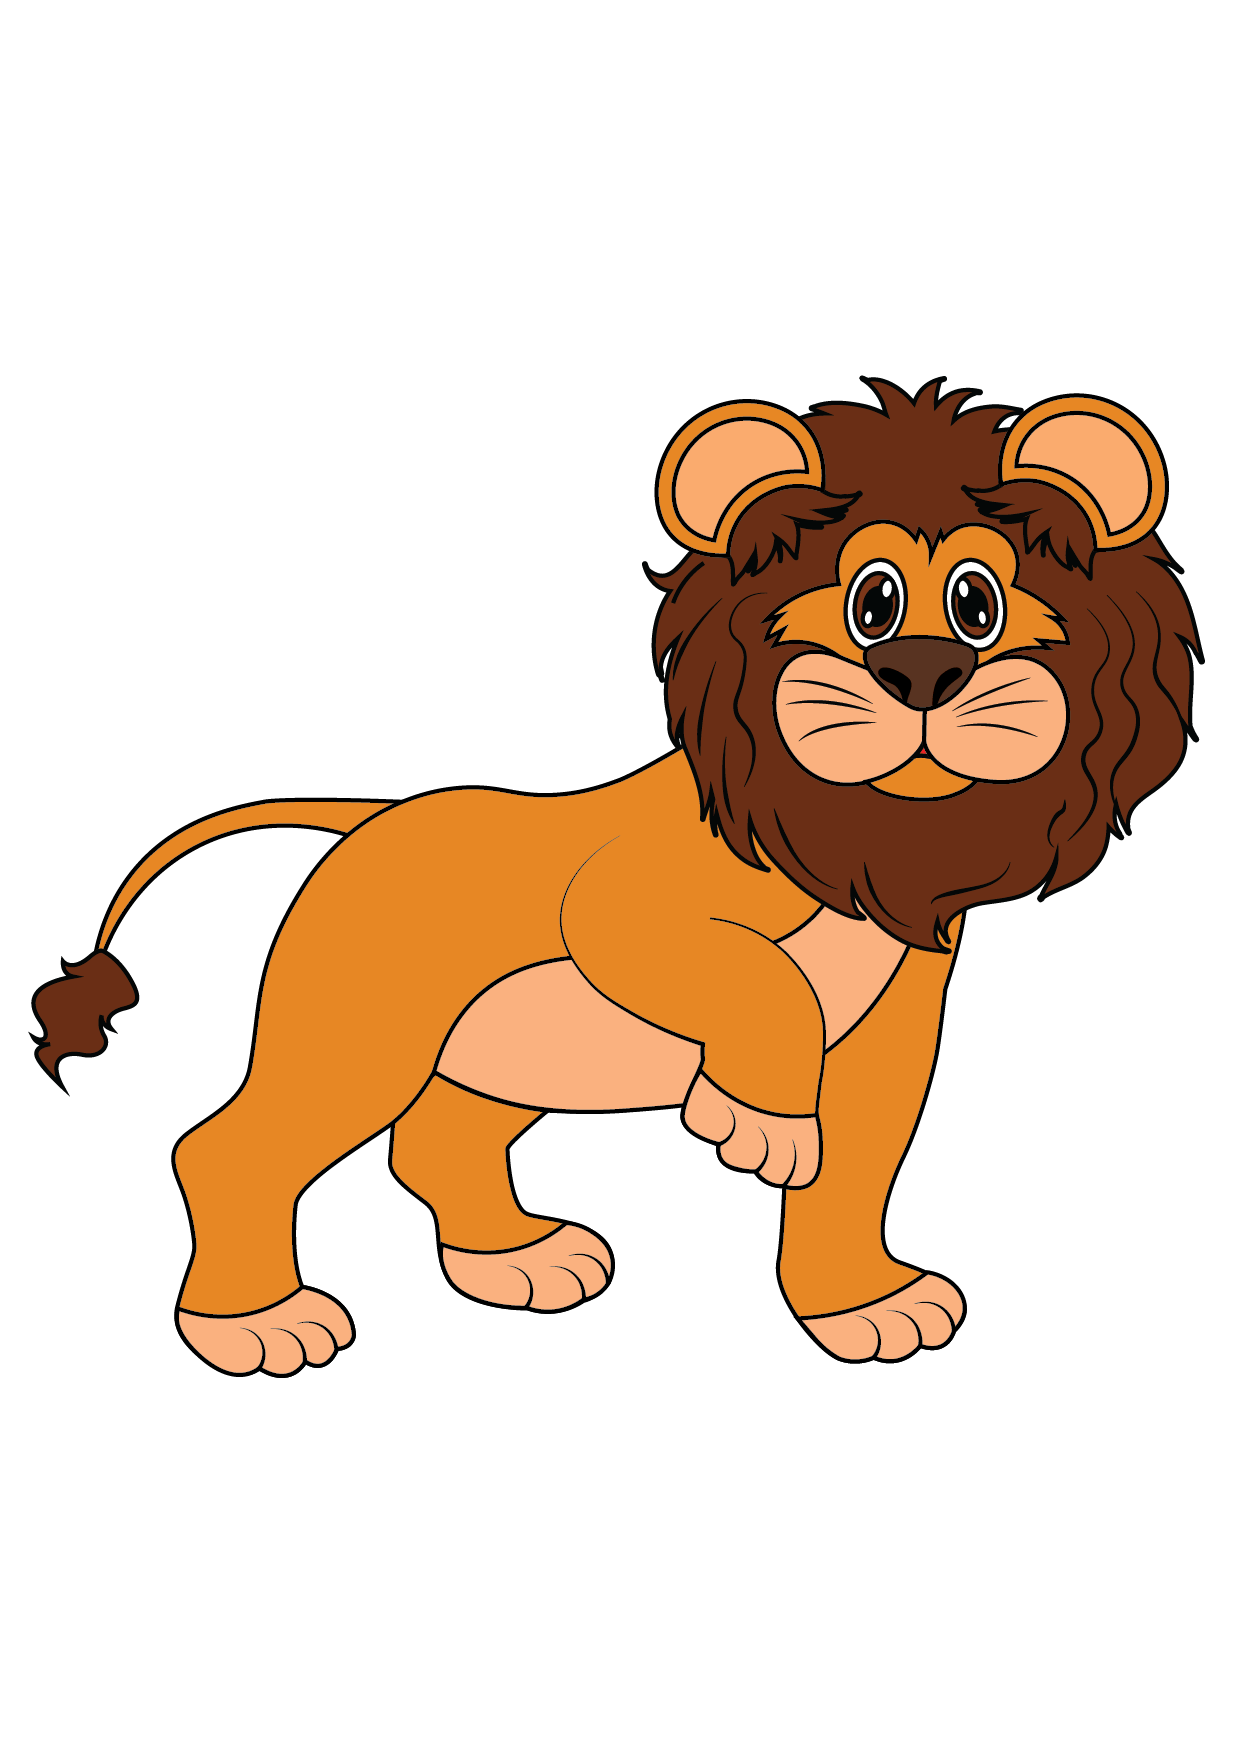 How to Draw A Lion Step by Step Printable